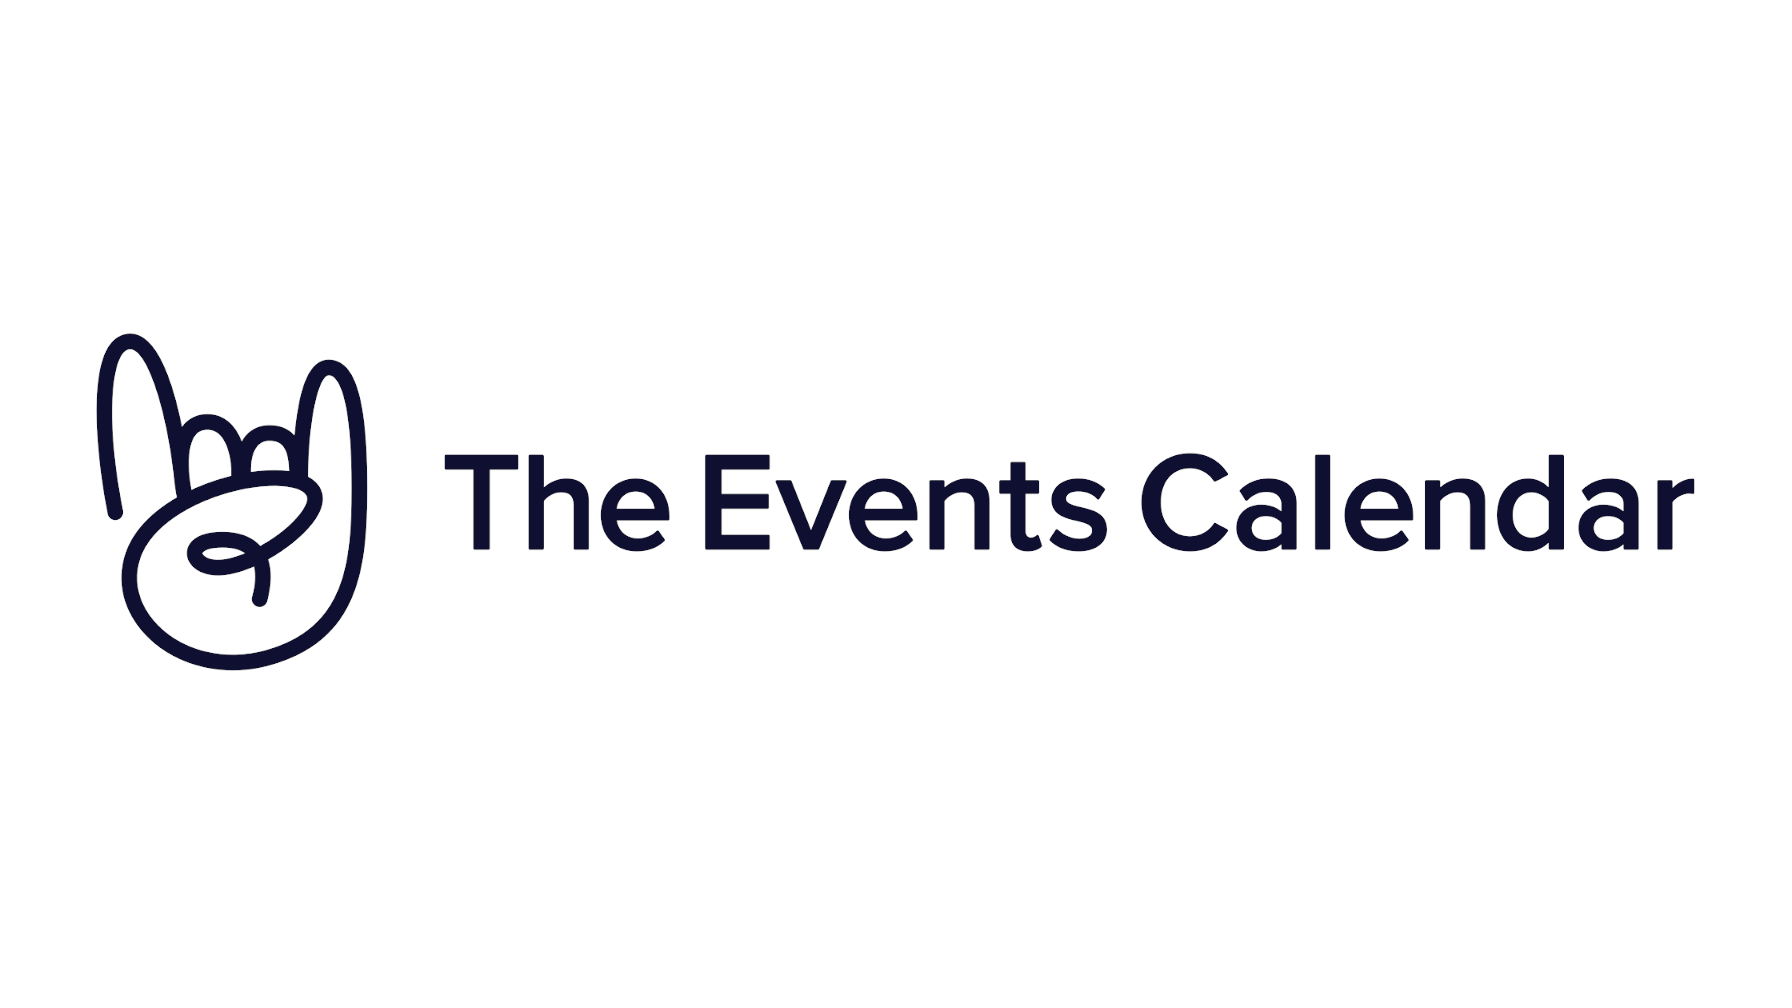 The Events Calendar easy to integrate with WordPress Sites